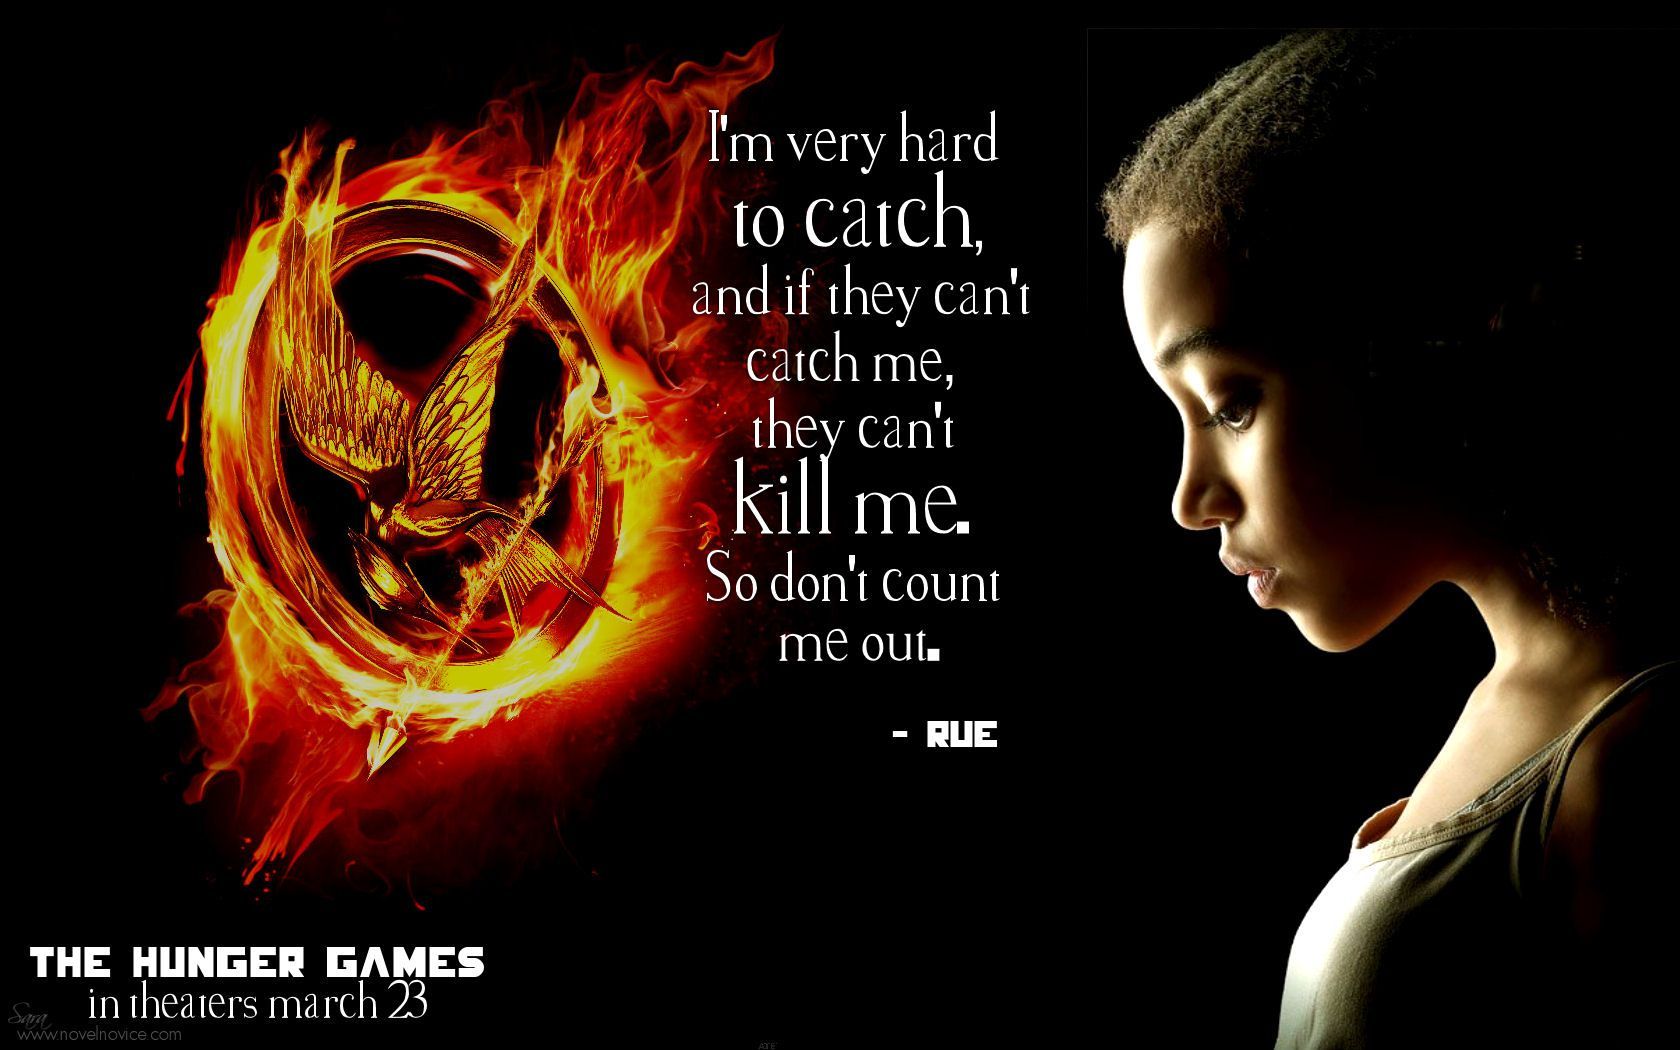 The Hunger Games Movie: Character Desktop Wallpaper. Hunger games quotes, Hunger games, Rue hunger games